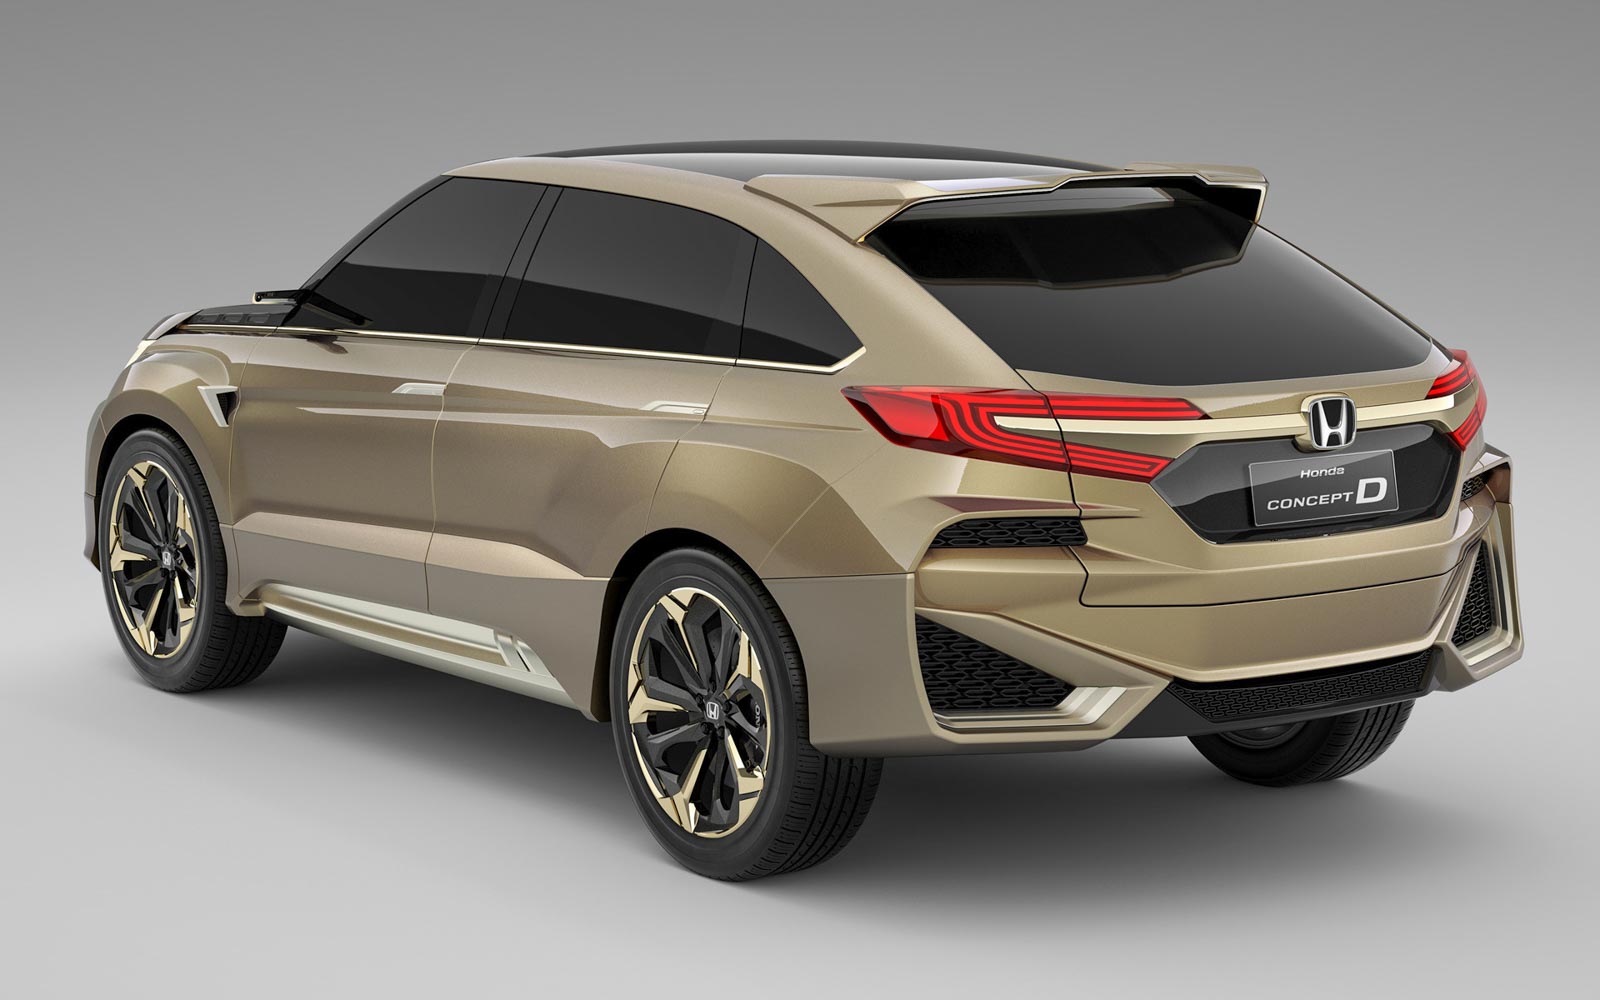 Honda Might Bring A Compact SUV In The Next One Year